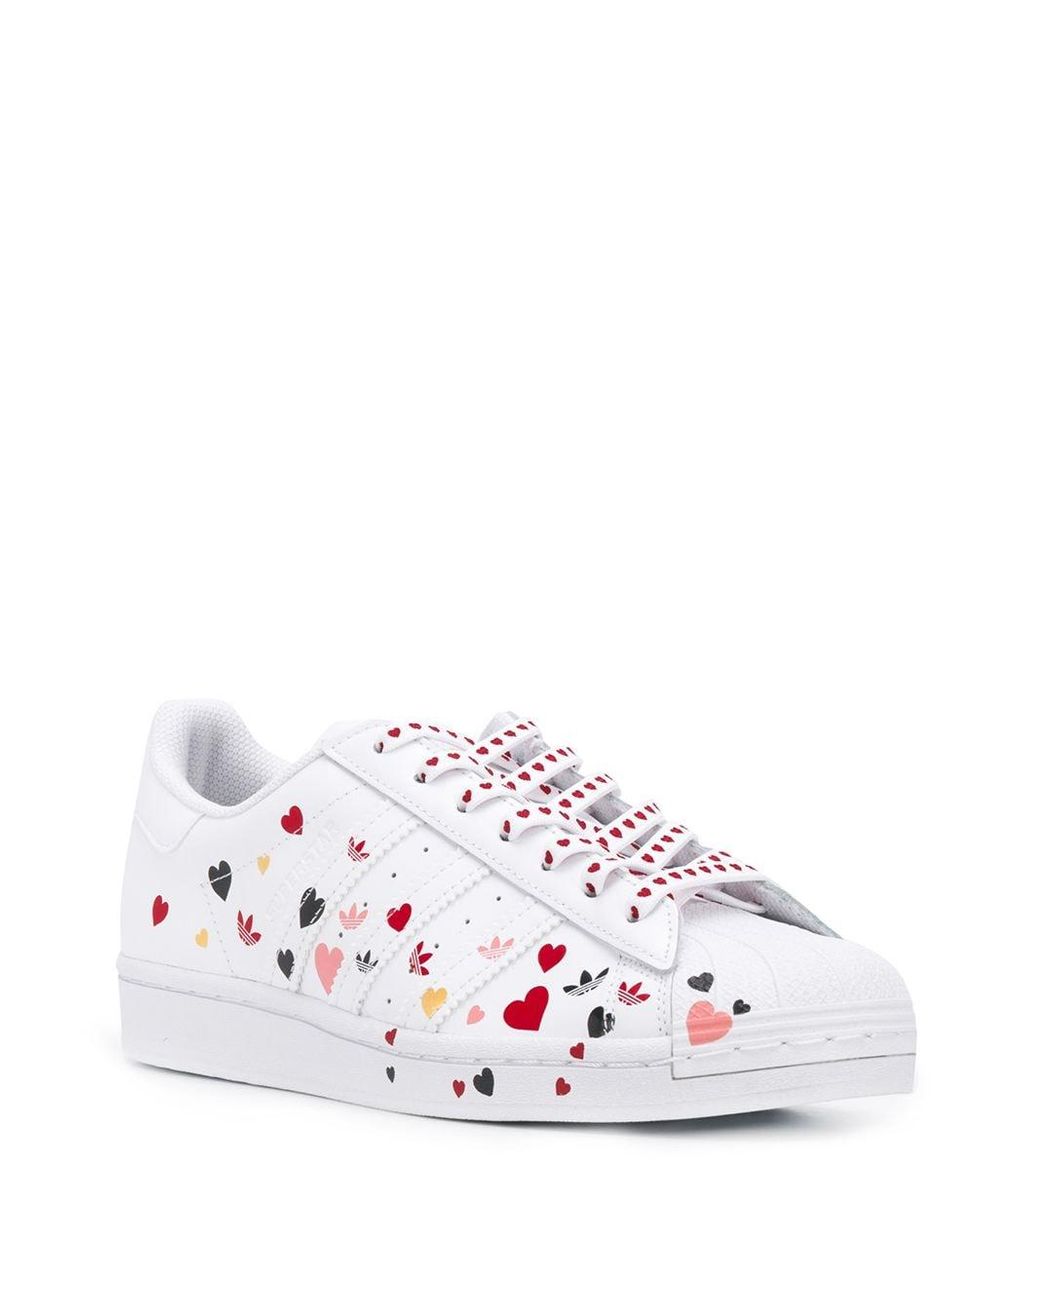 adidas Superstar Heart-print Sneakers in White | Lyst UK